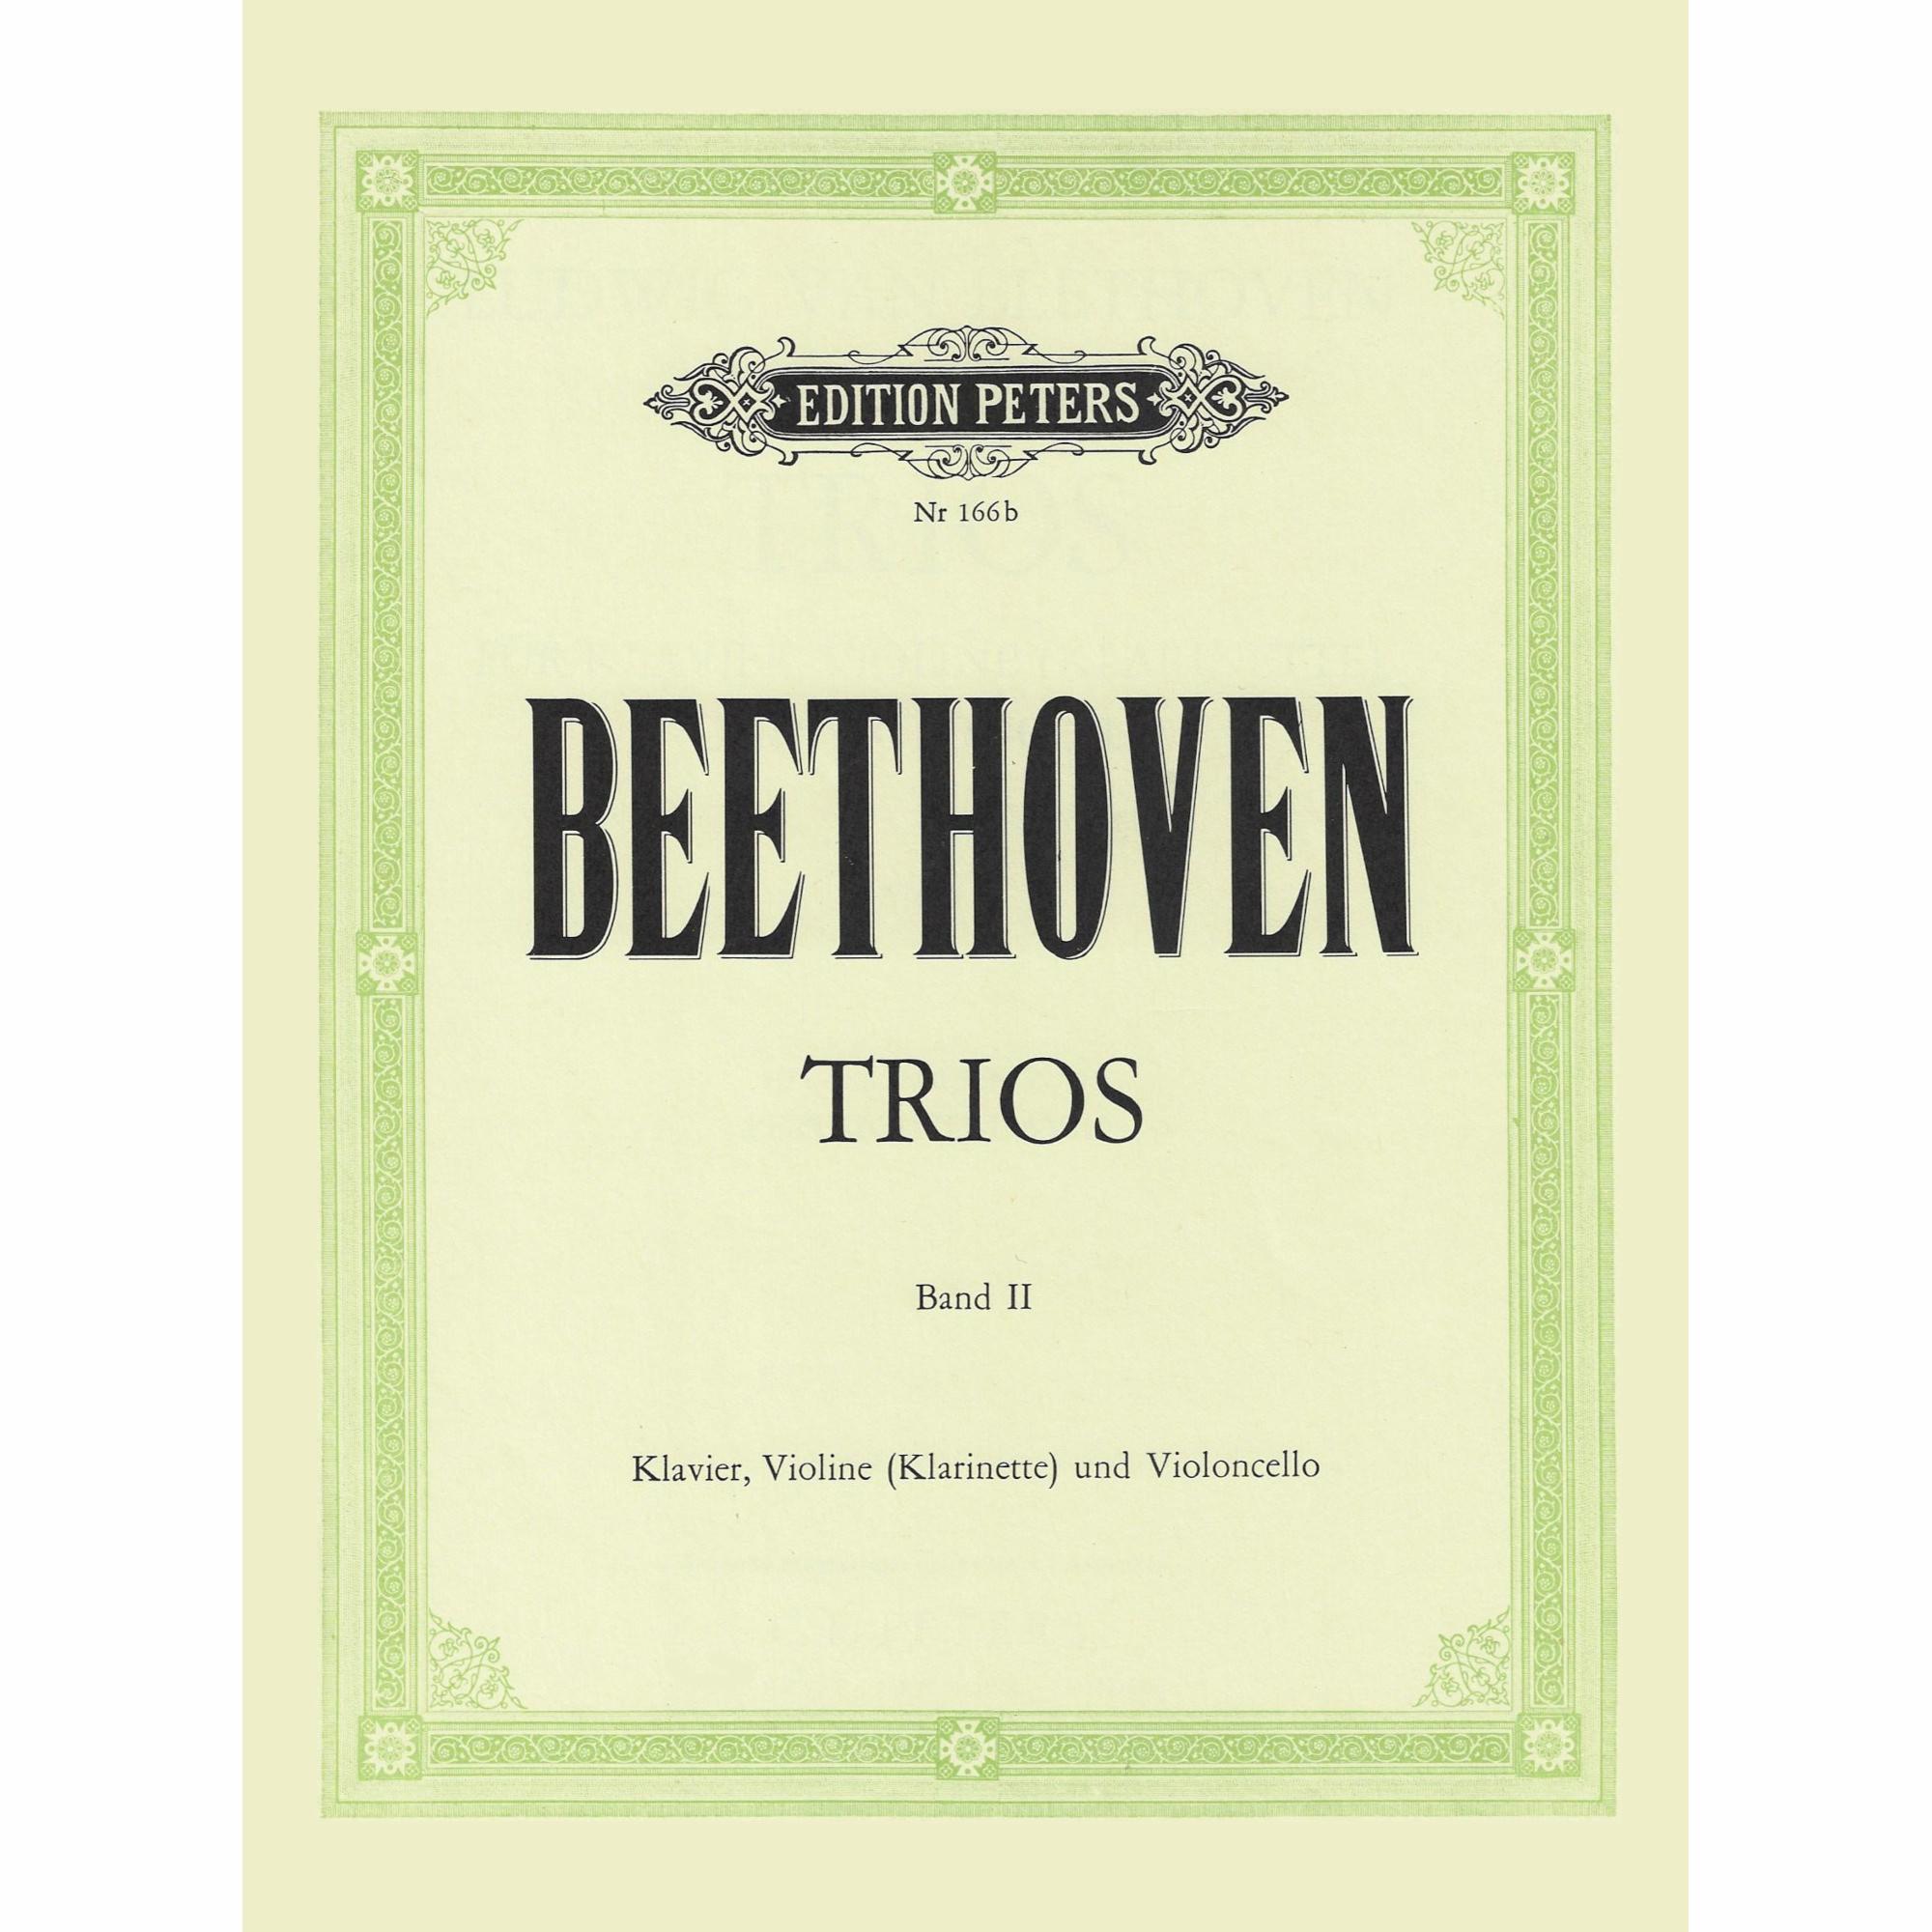 Beethoven -- Septet Op. 20 and Symphony No. 2, Op. 36 for Piano Trio